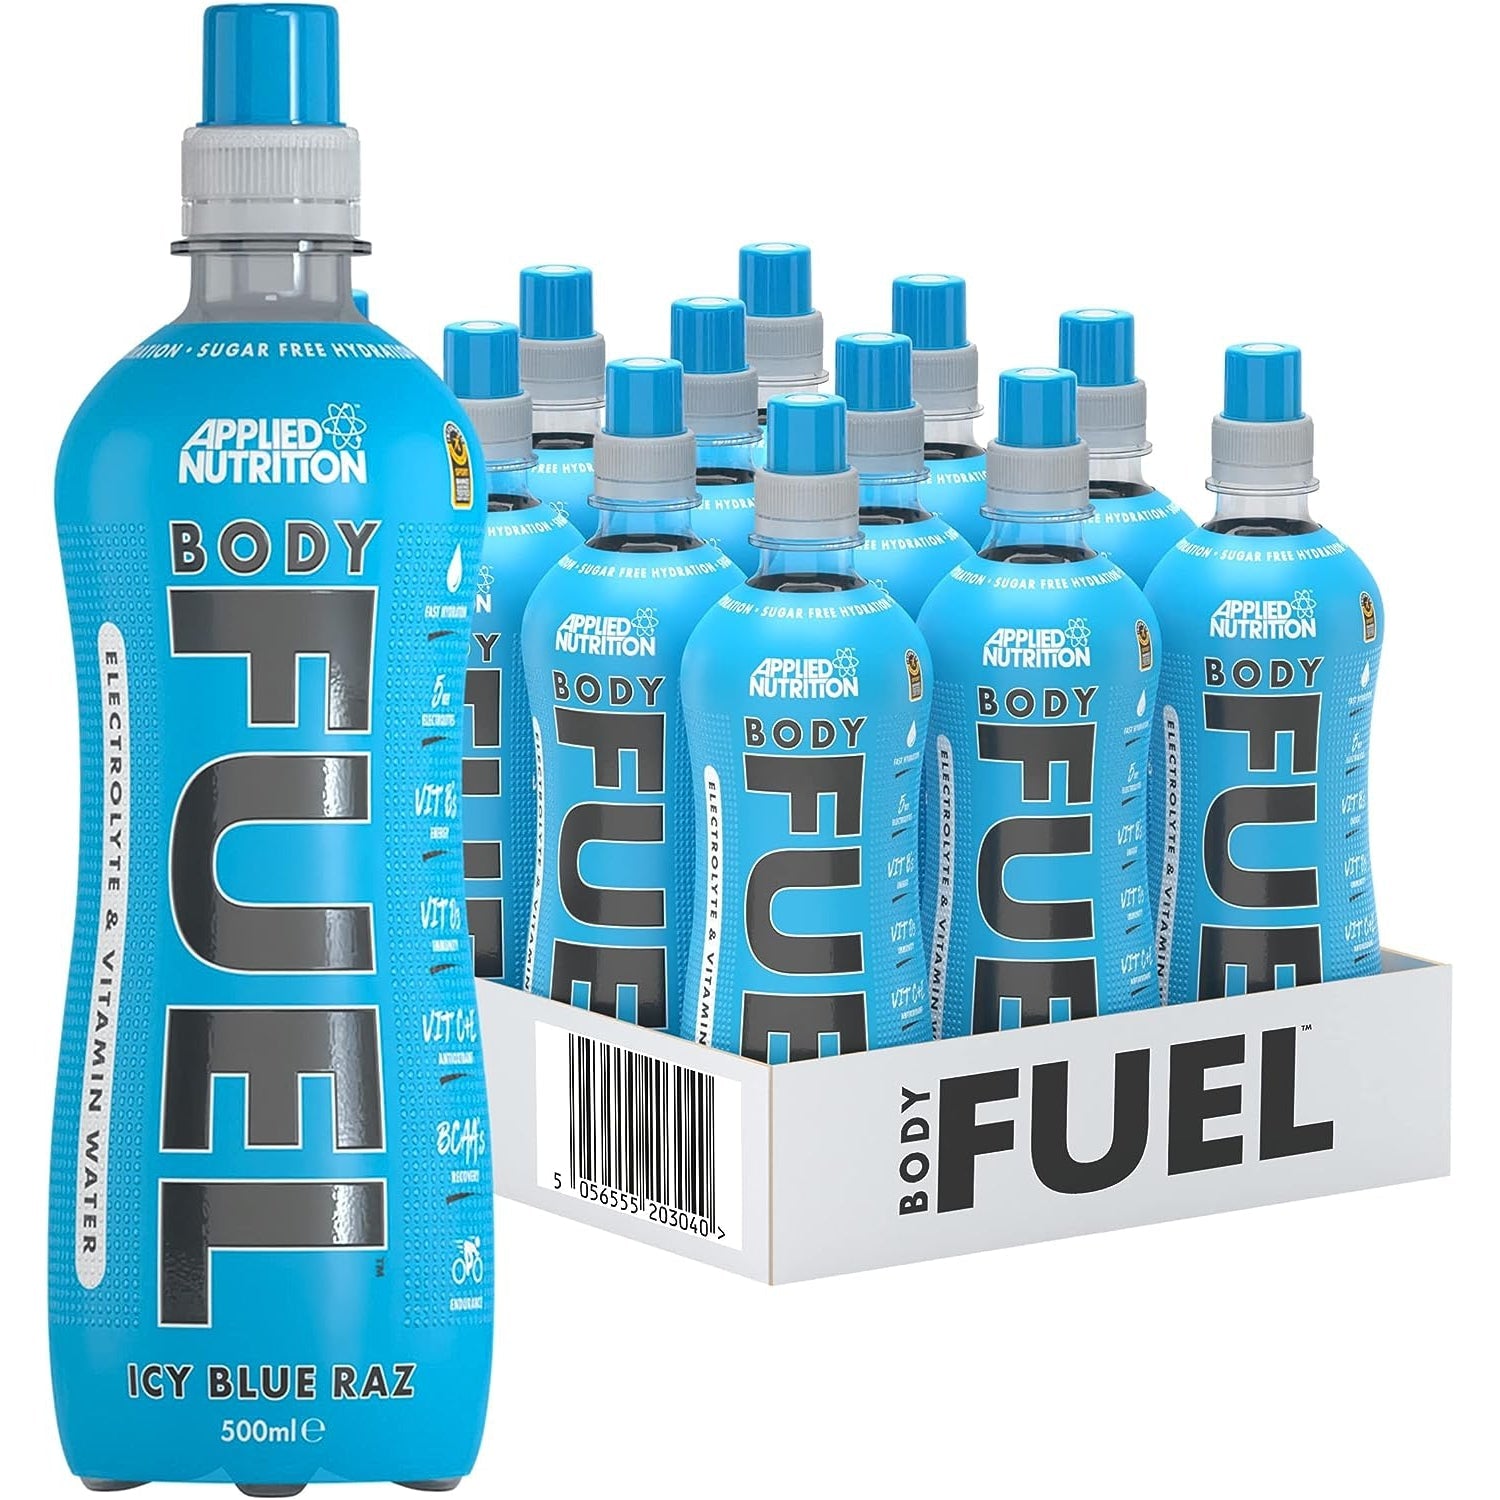 Applied Nutrition Body Fuel Electrolyte & Vitamin Water with BCAA 500ml Icy Blue Raz